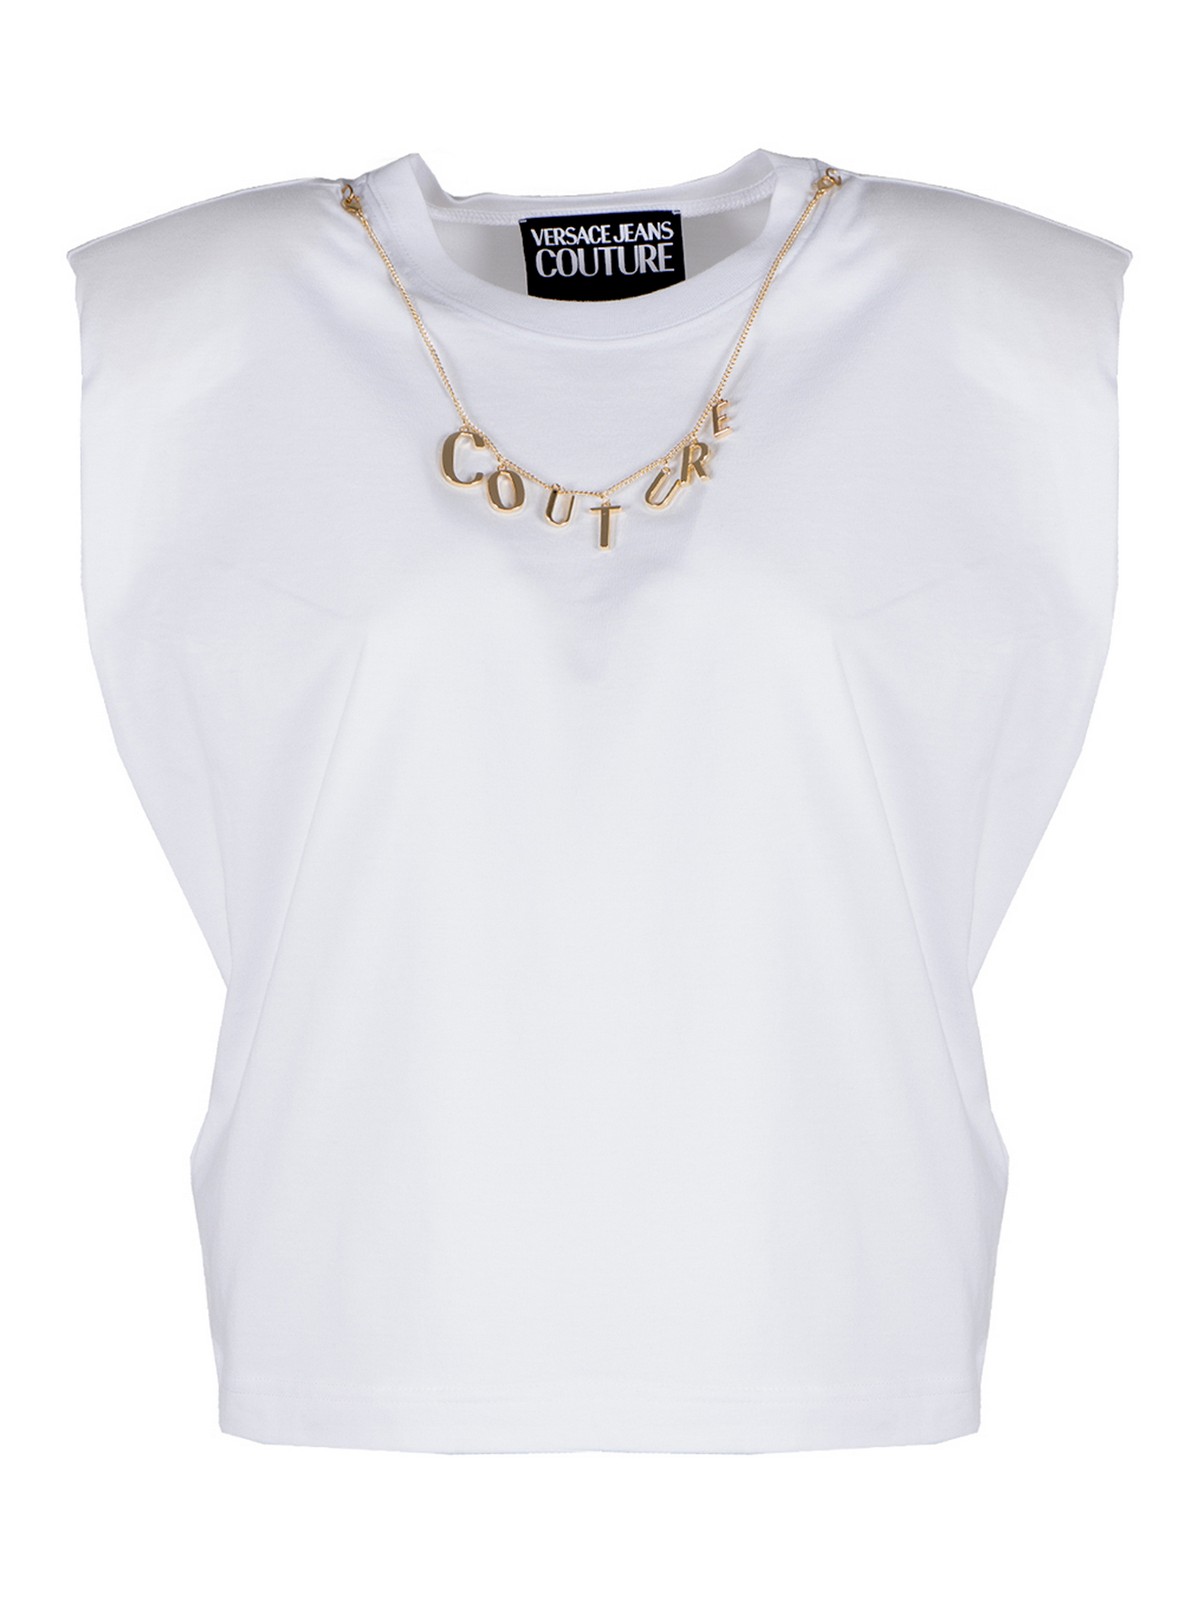 Versace Jeans Couture Couture Charms Top In White